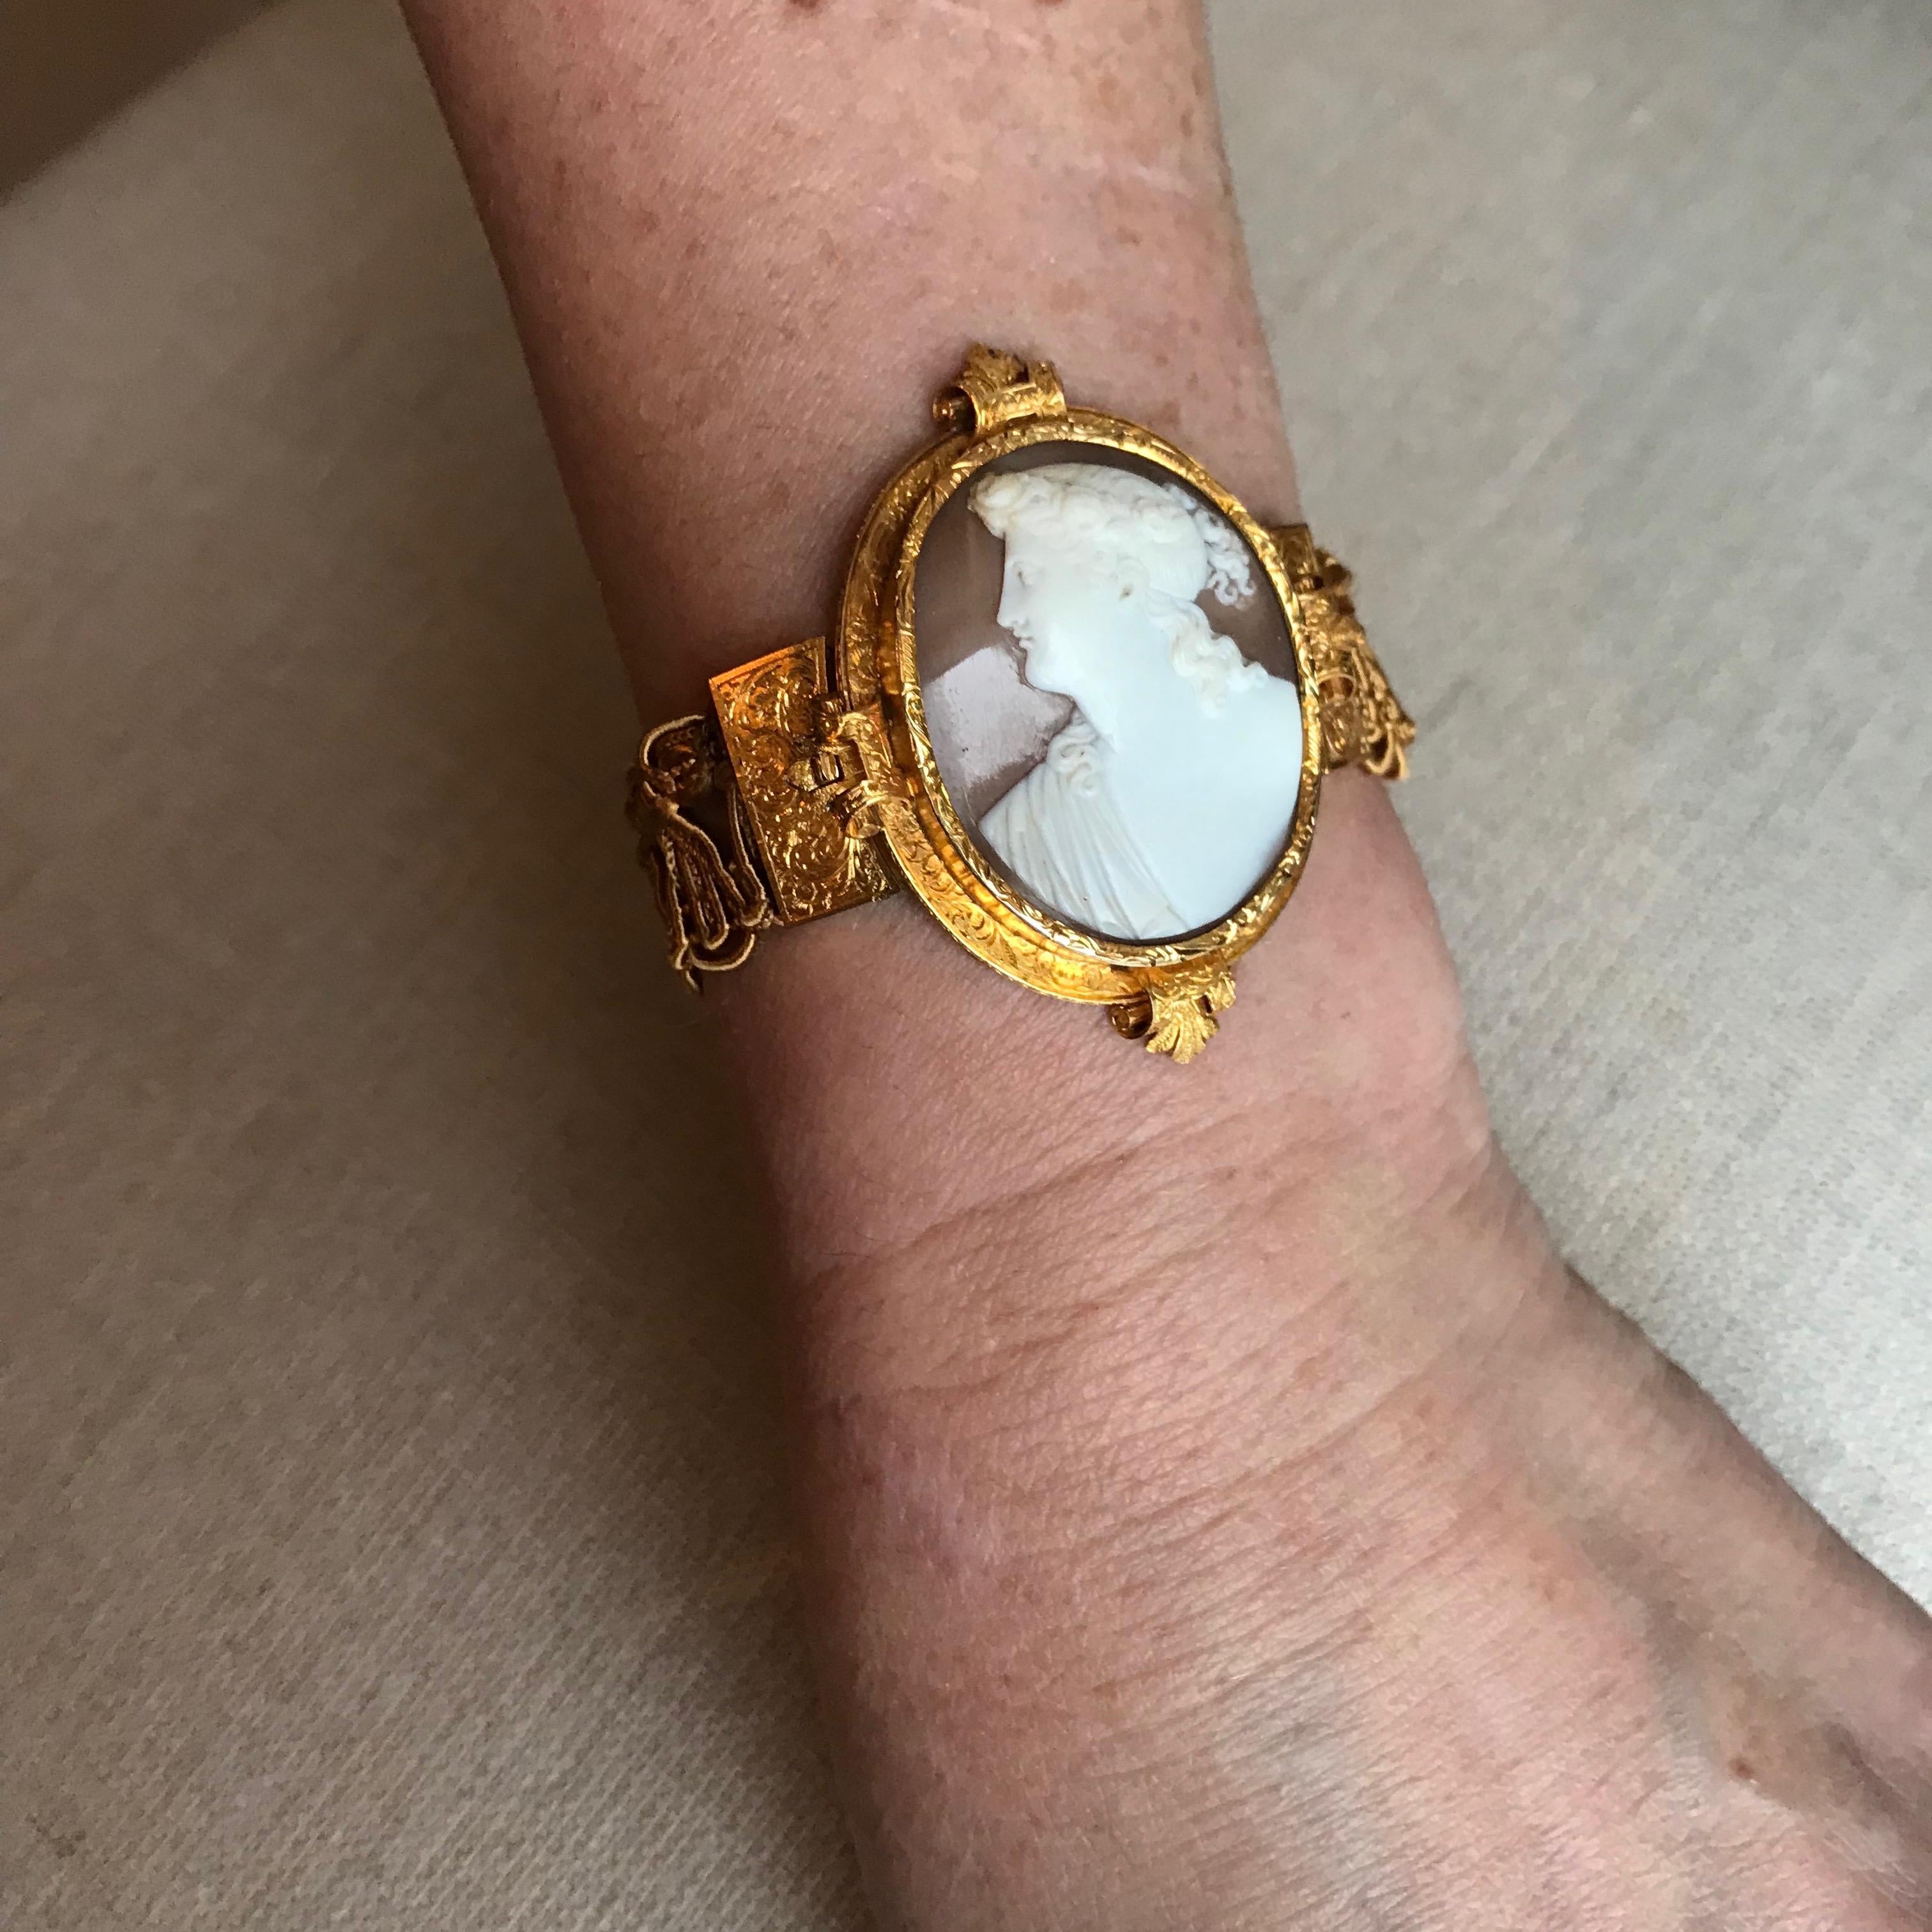  Froment-Meurice Set in 18 Carat, Yellow Gold and Cameo, 19th Century 9